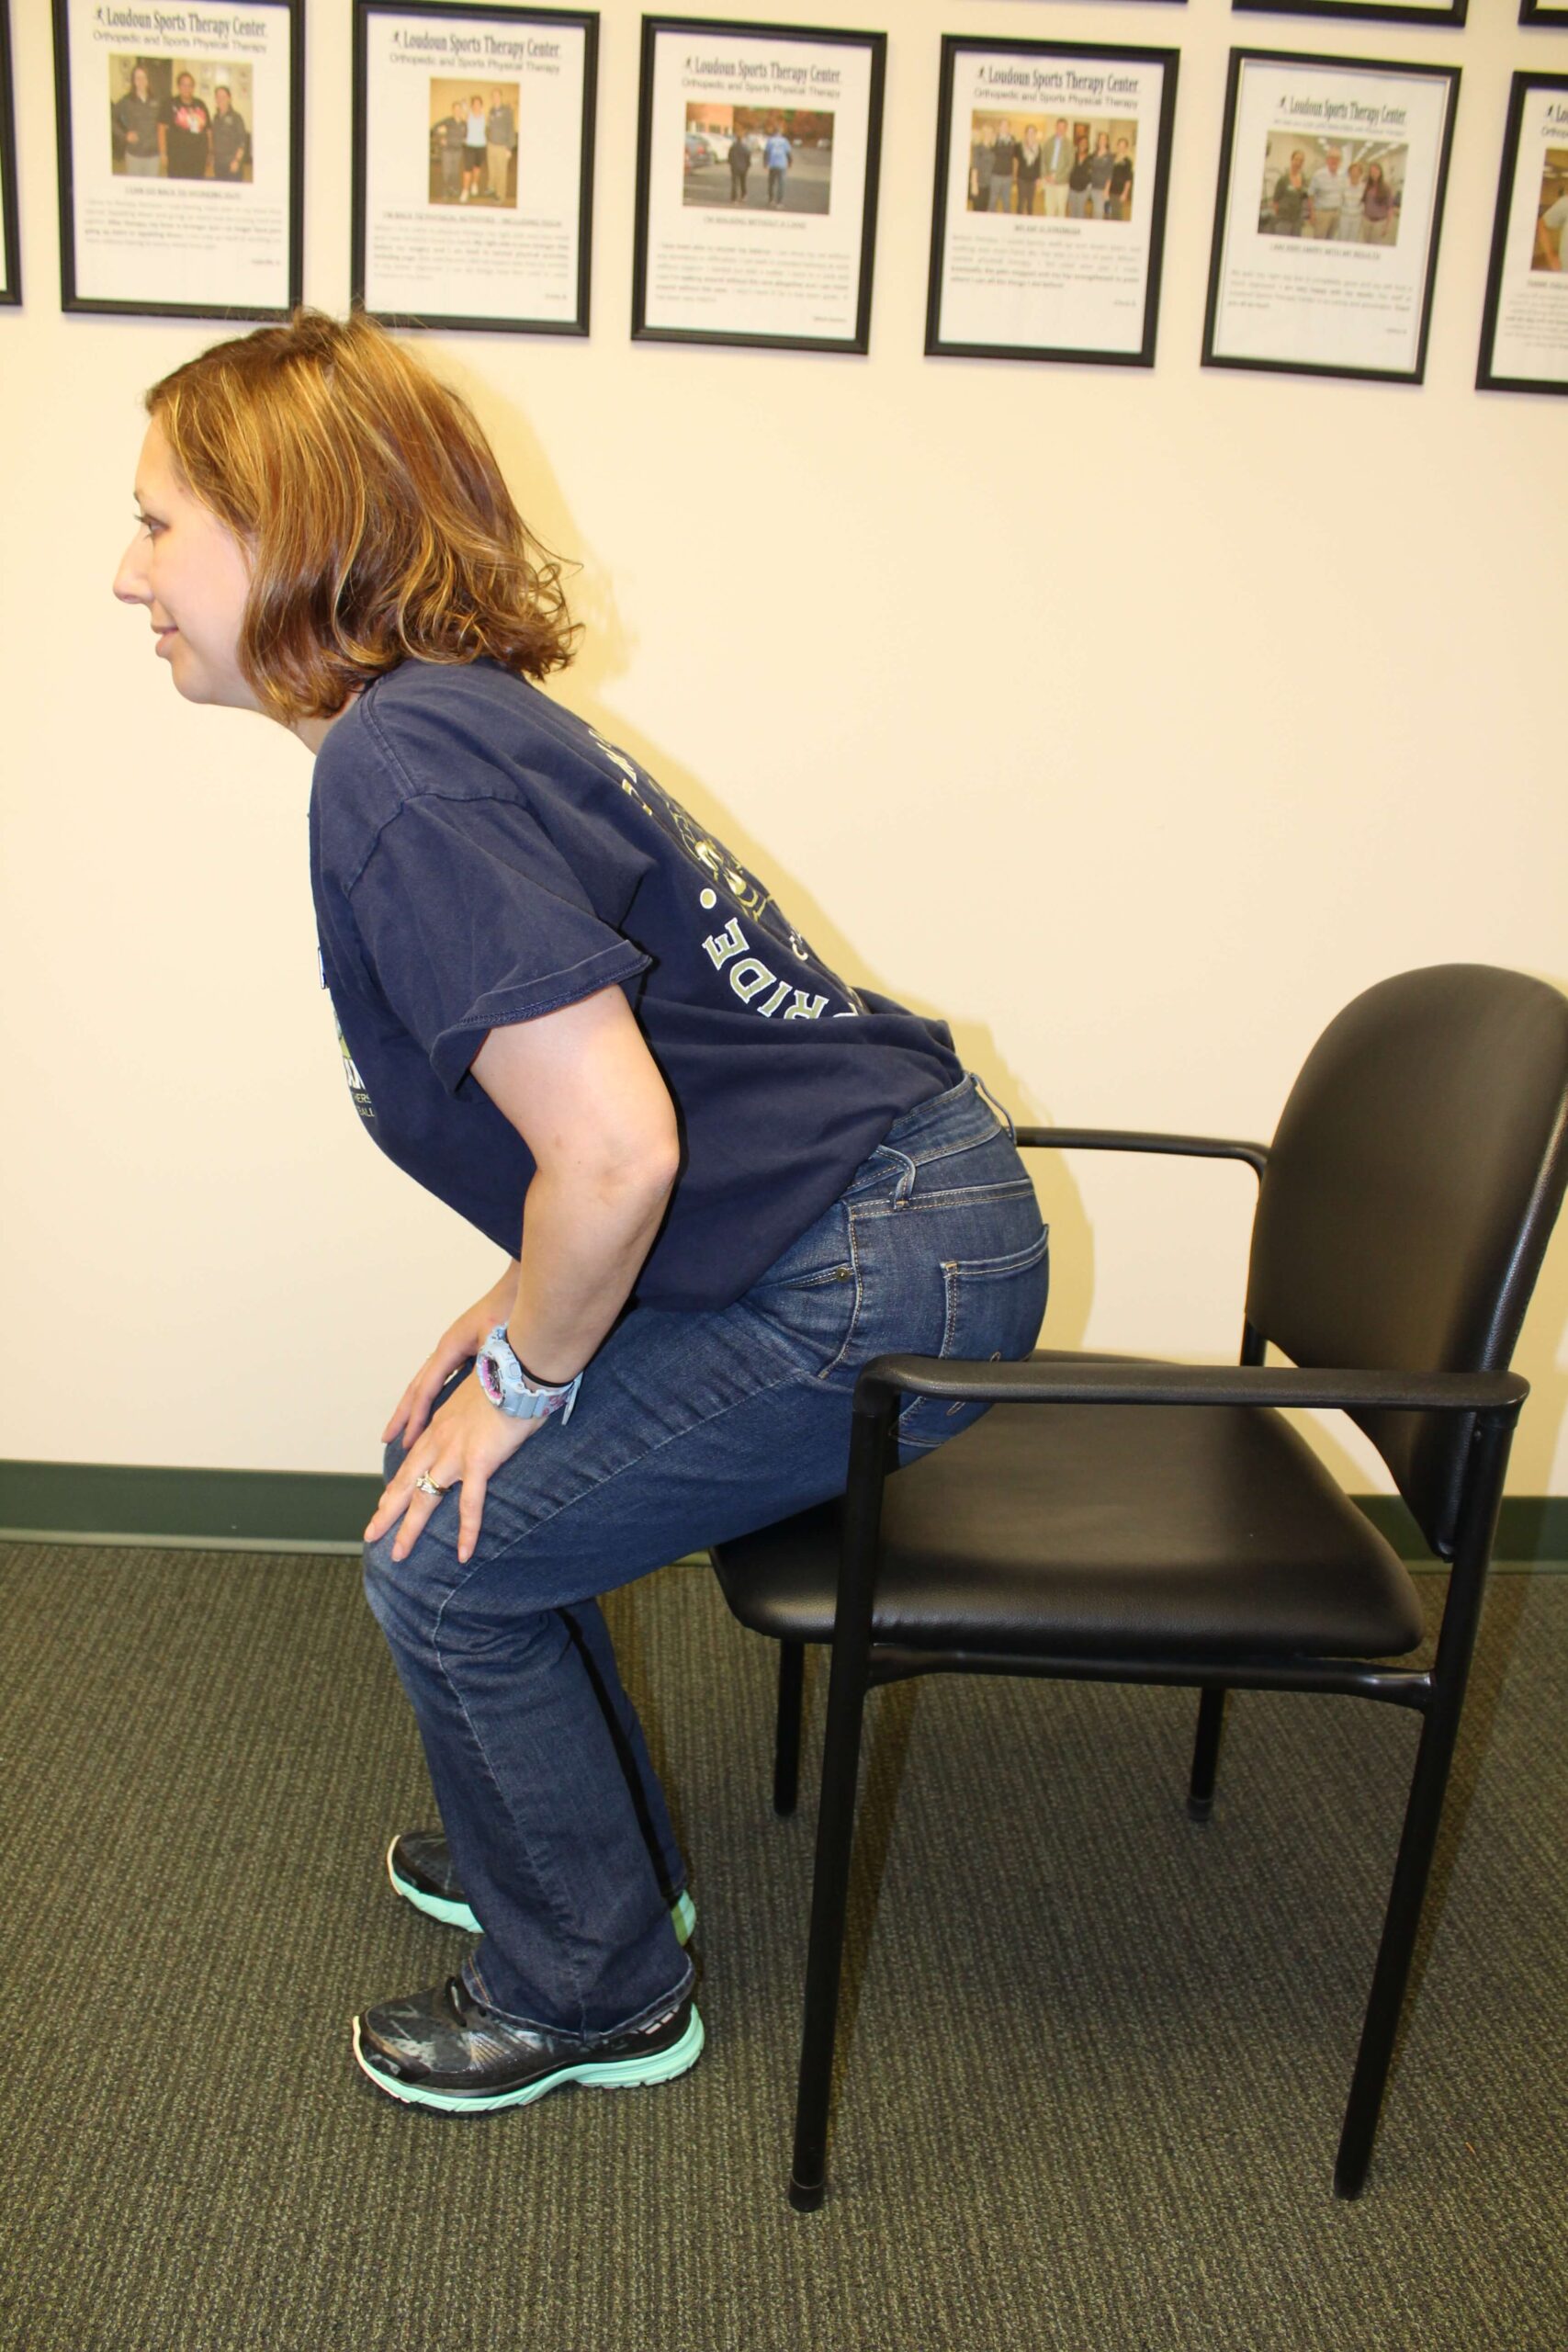 Moving, standing, sitting creating discomfort Physical Therapy Ashburn, VA